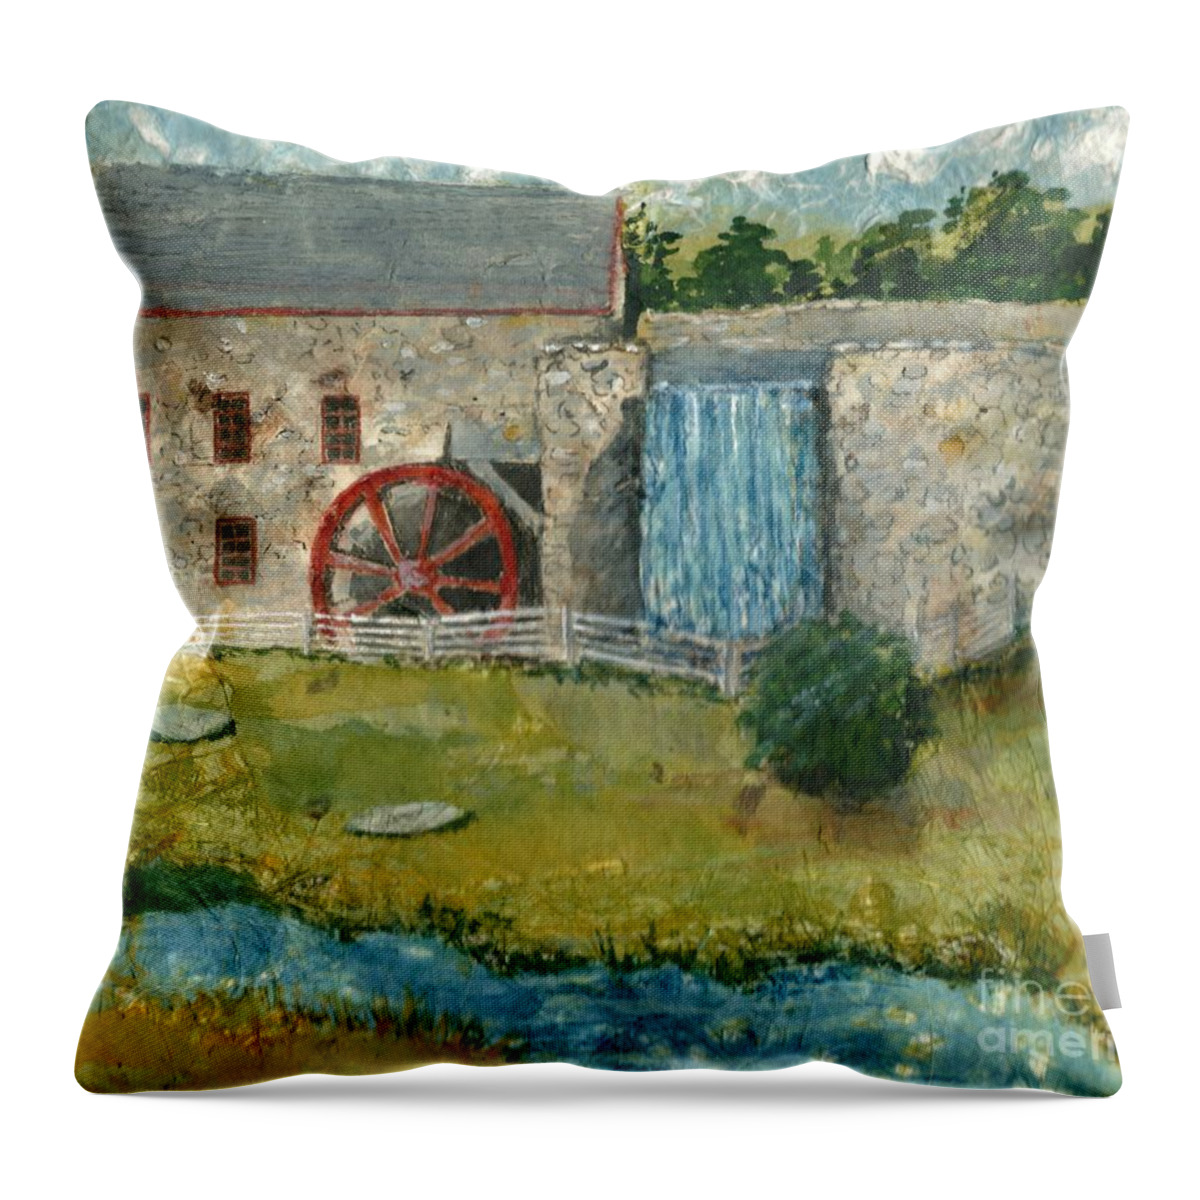 Gristmill Throw Pillow featuring the painting Pepperidge Farm Gristmill by Lynn Babineau